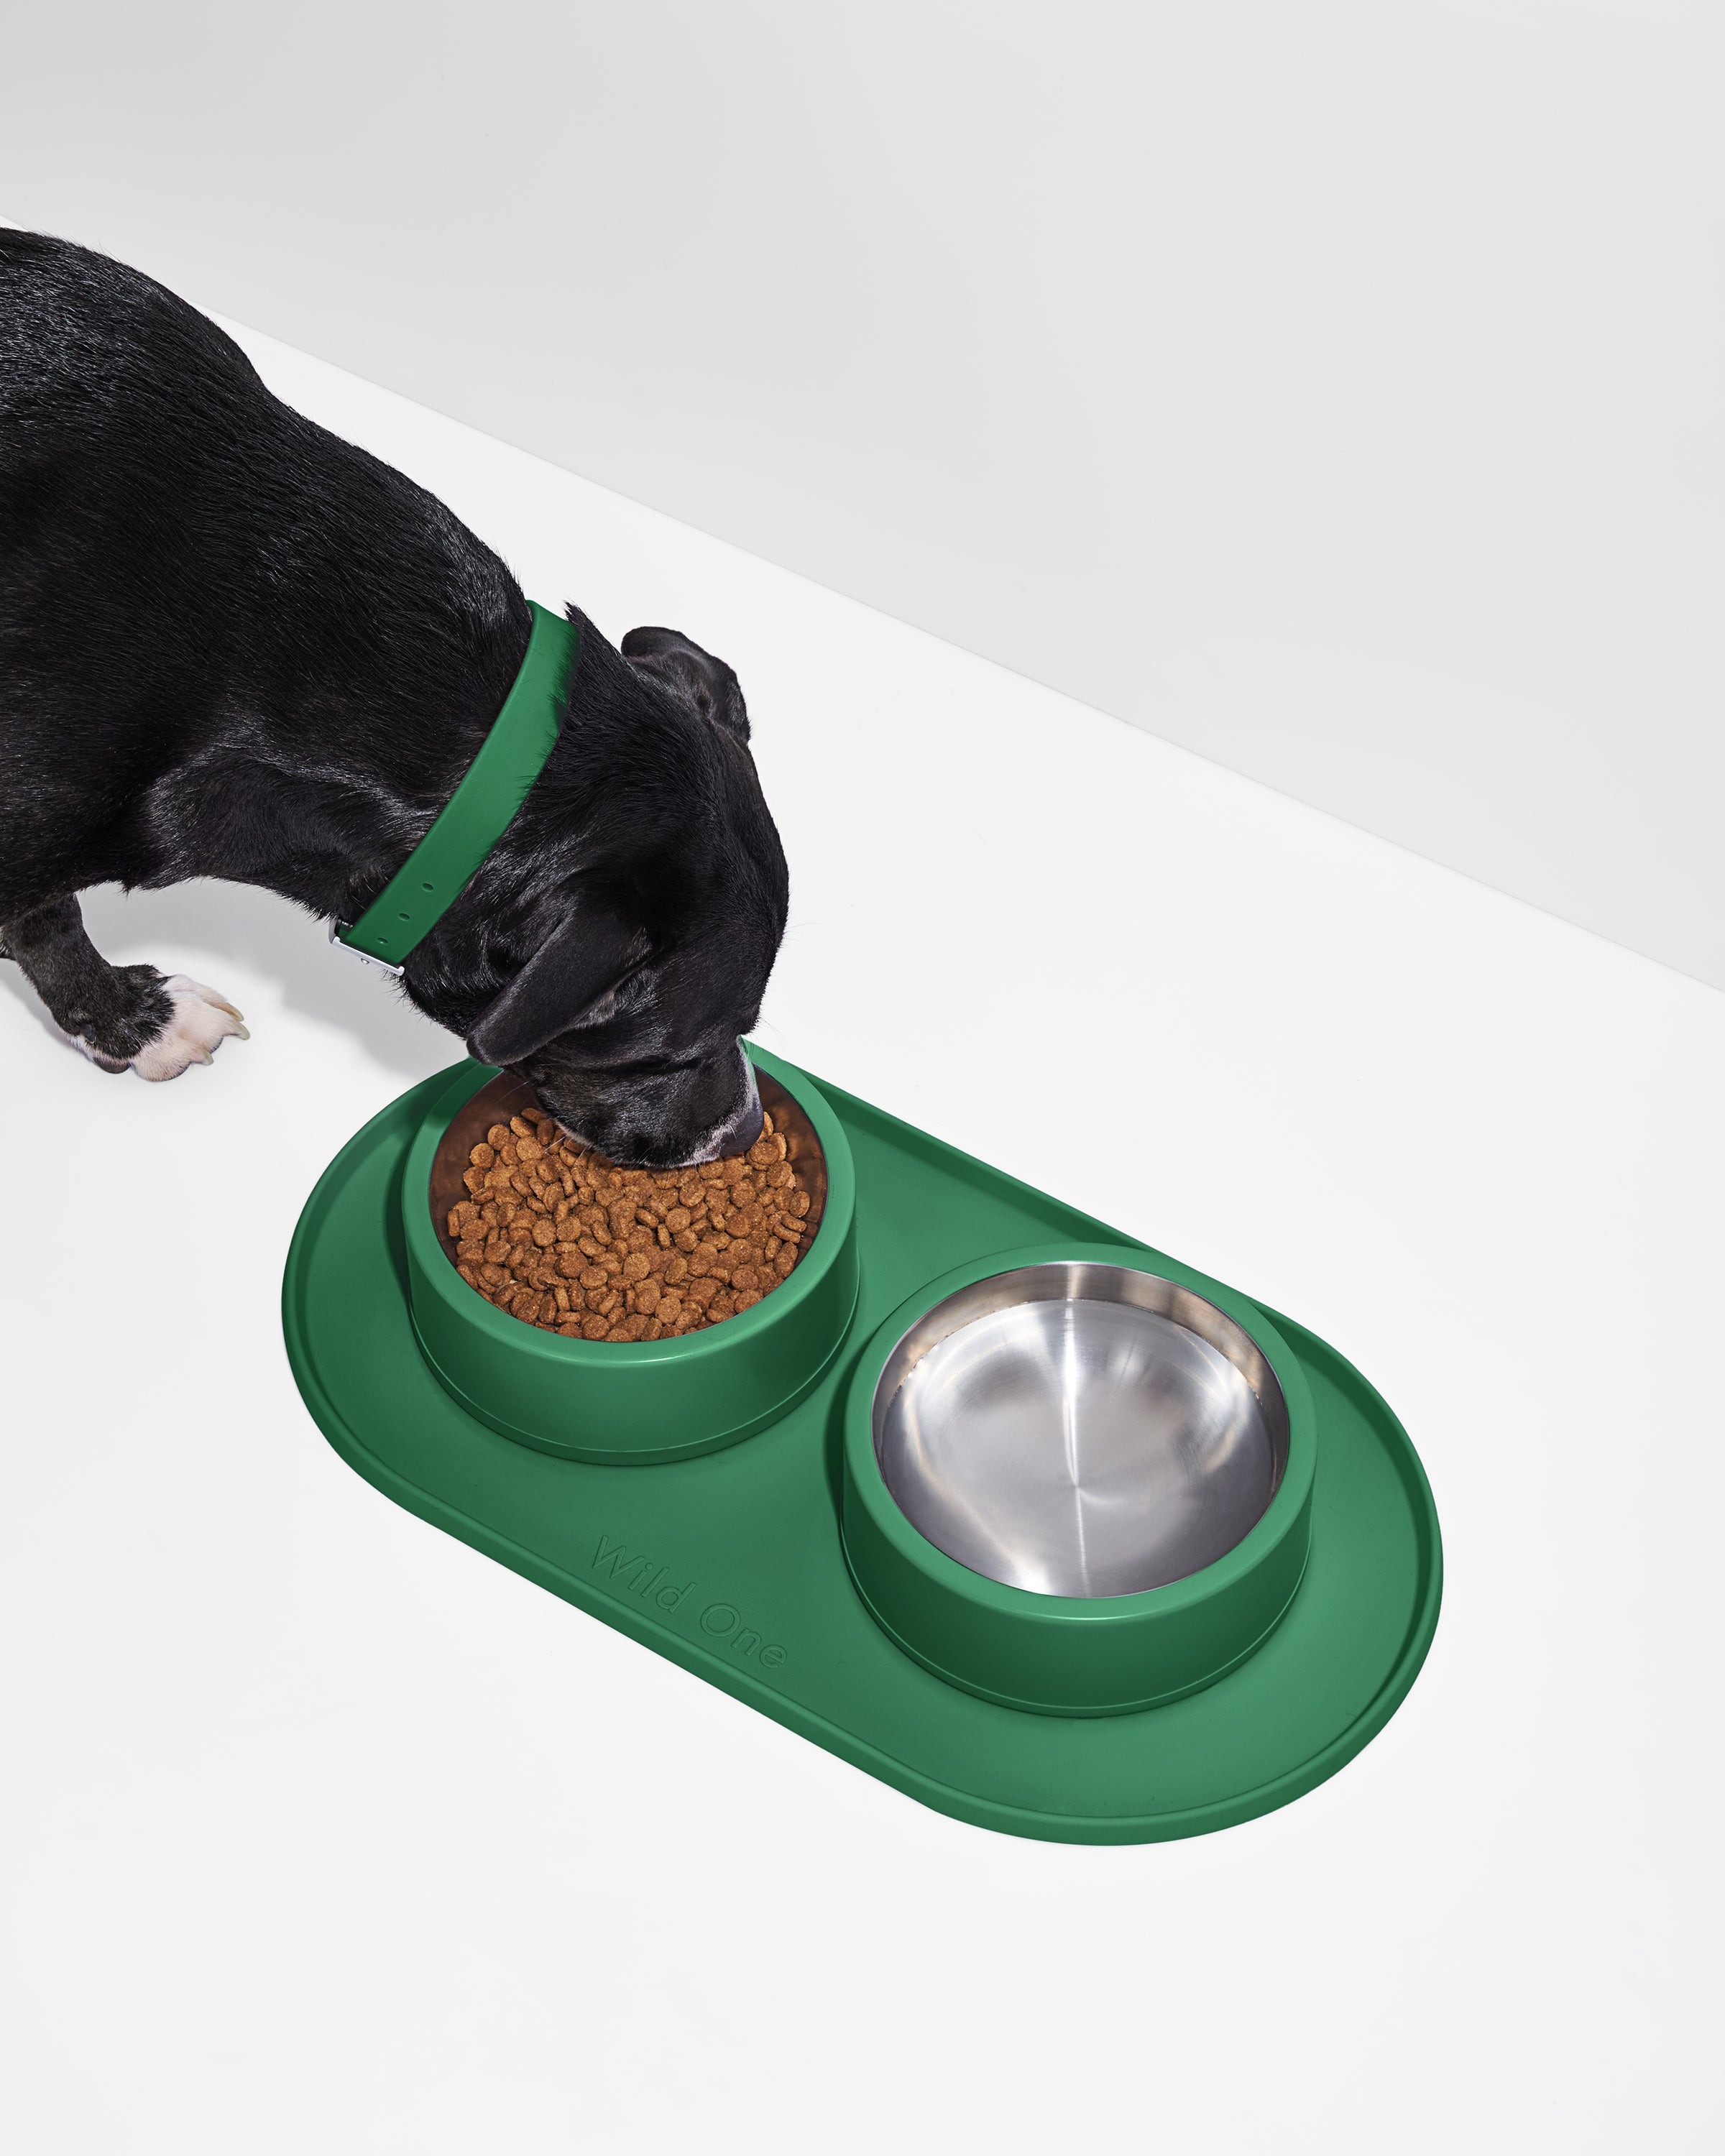 Stainless Steel Dog Bowl Set - Wild One